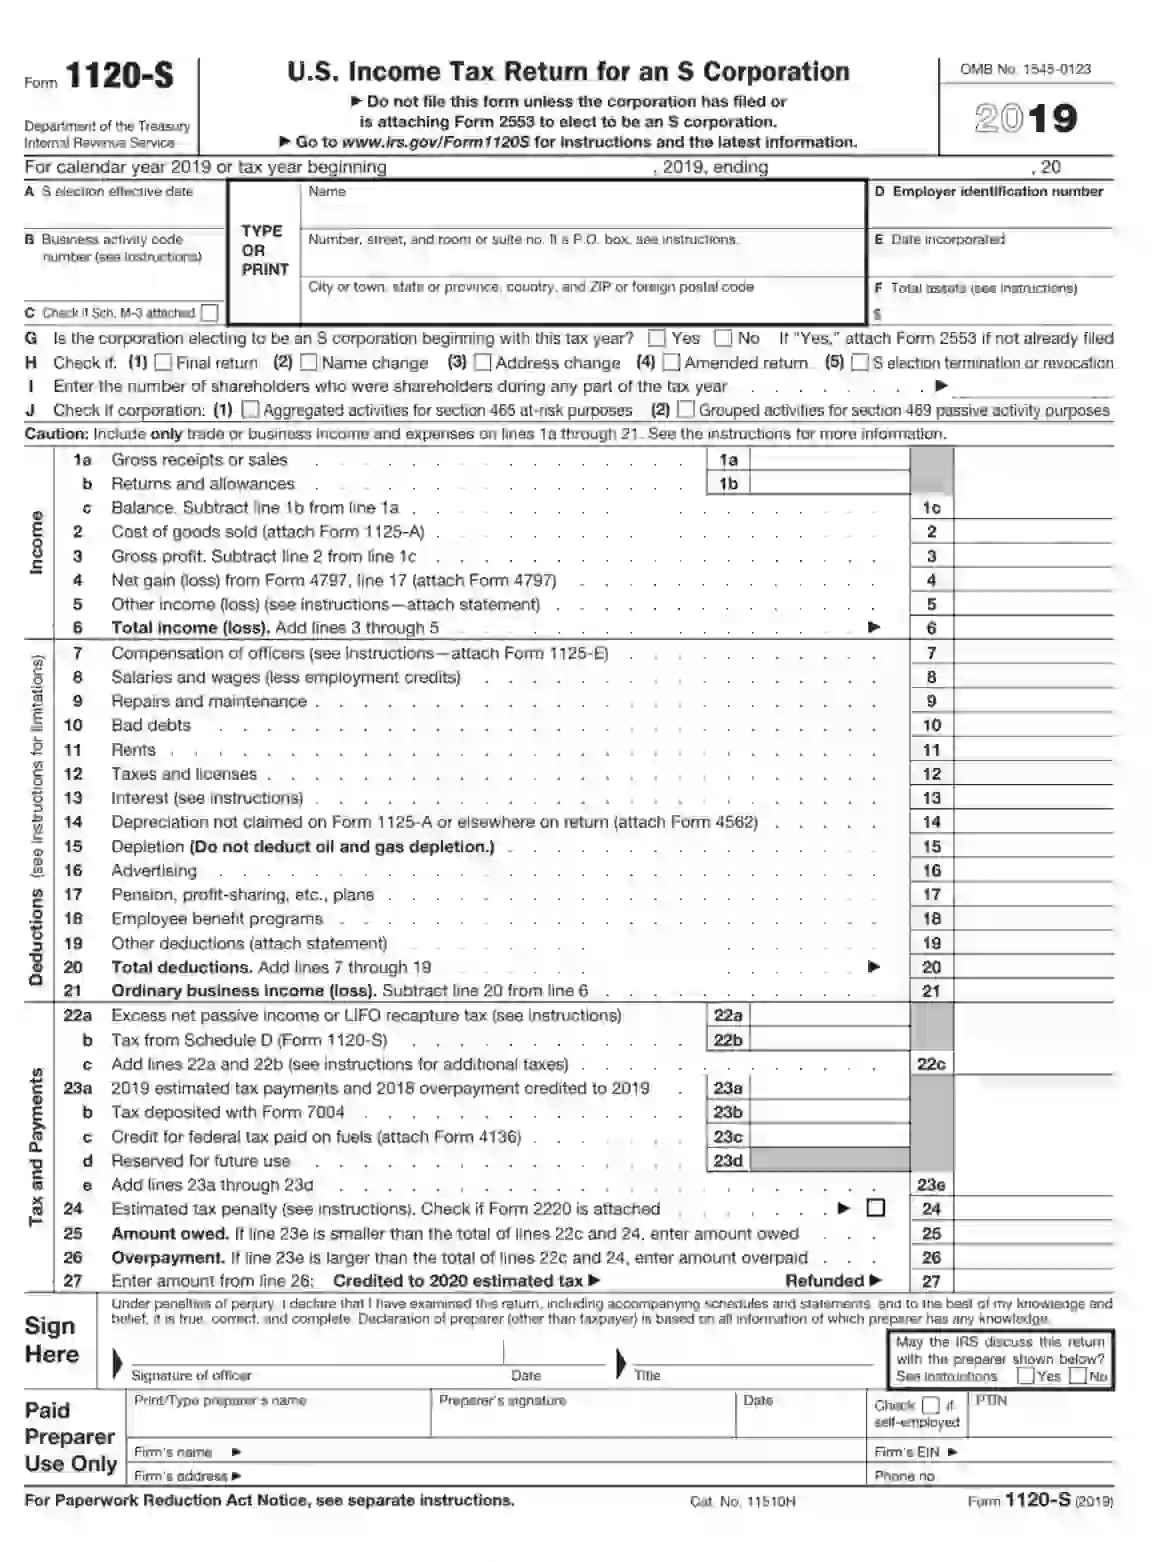 irs form 1120-s